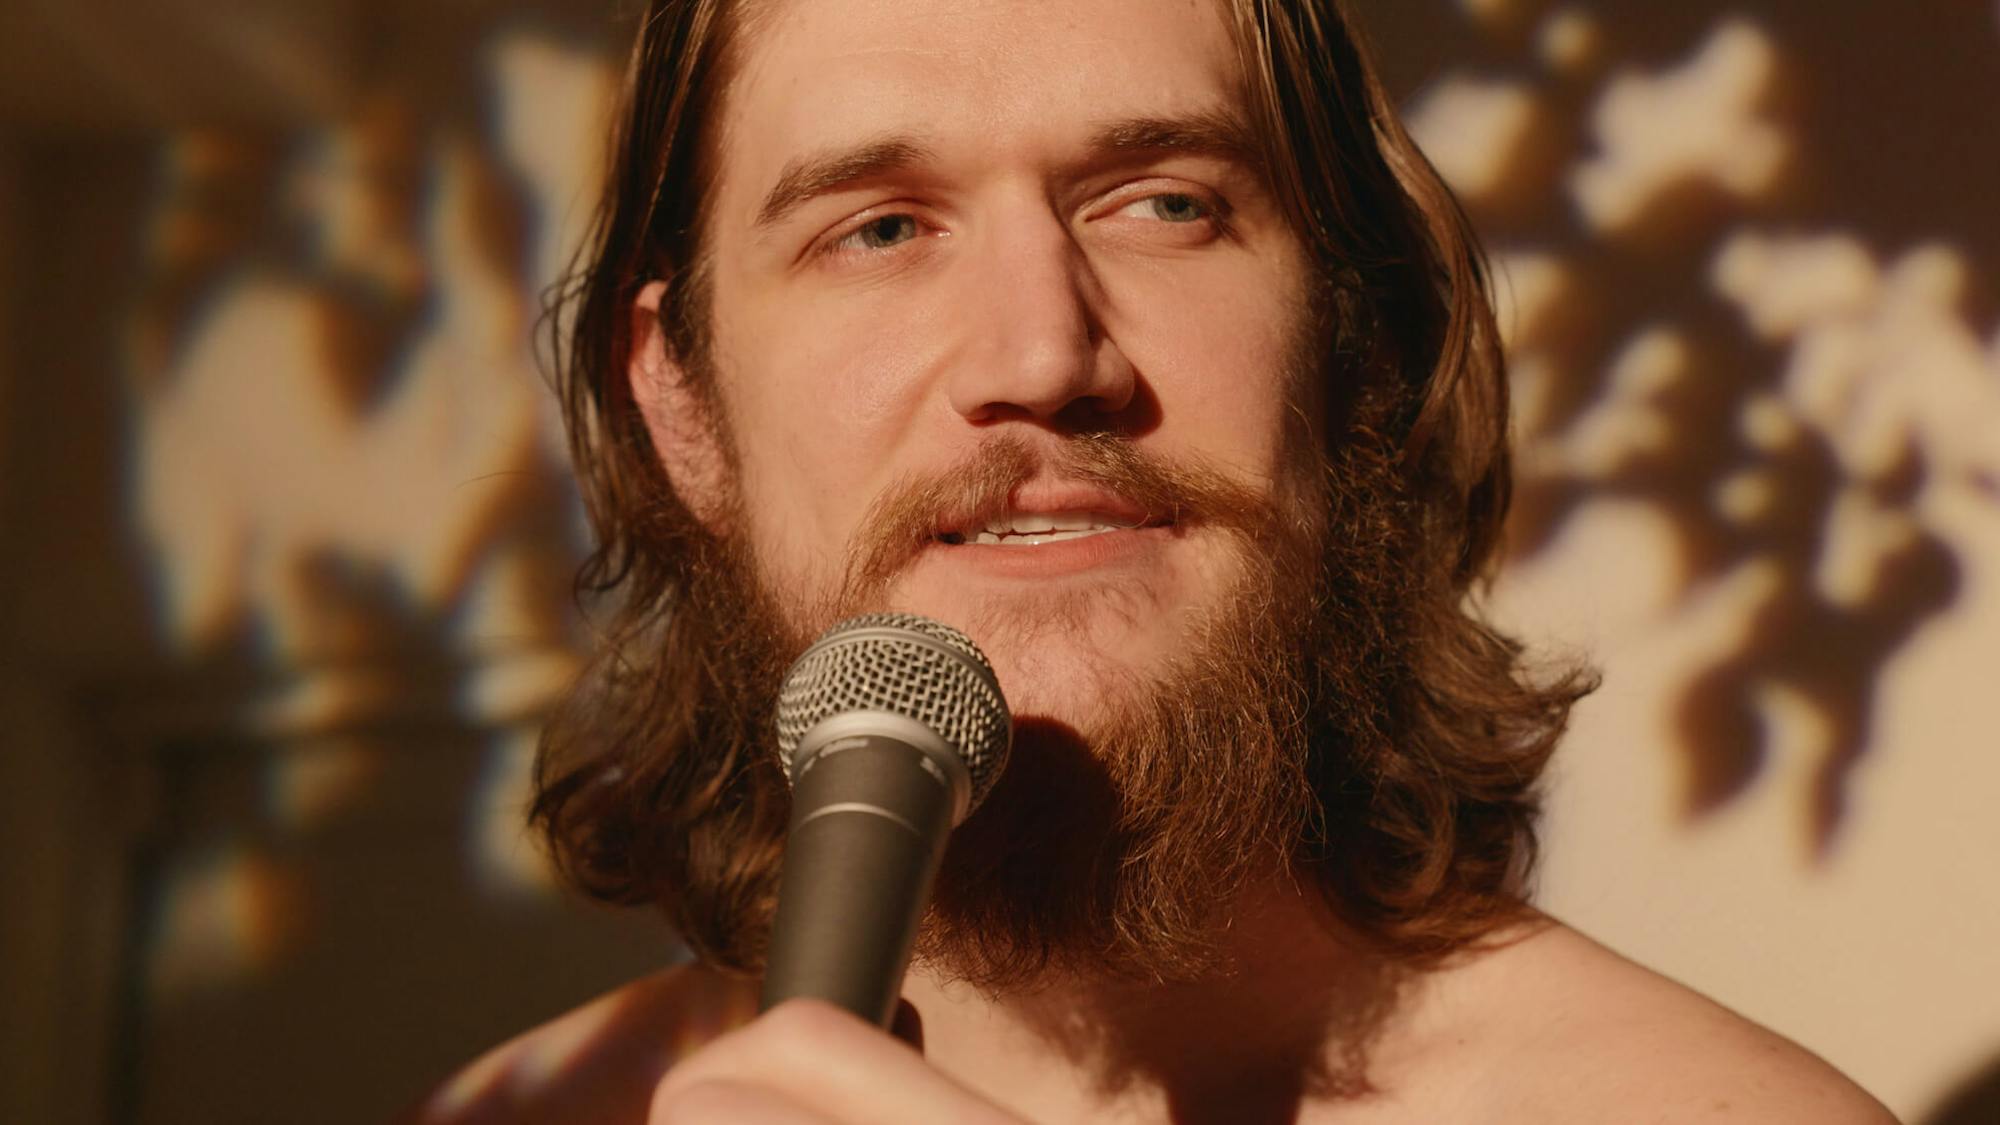 In this close up shot, Bo Burnham sings into a microphone. He is lit by dappled light, his hair is long, and he has a beard and mustache.